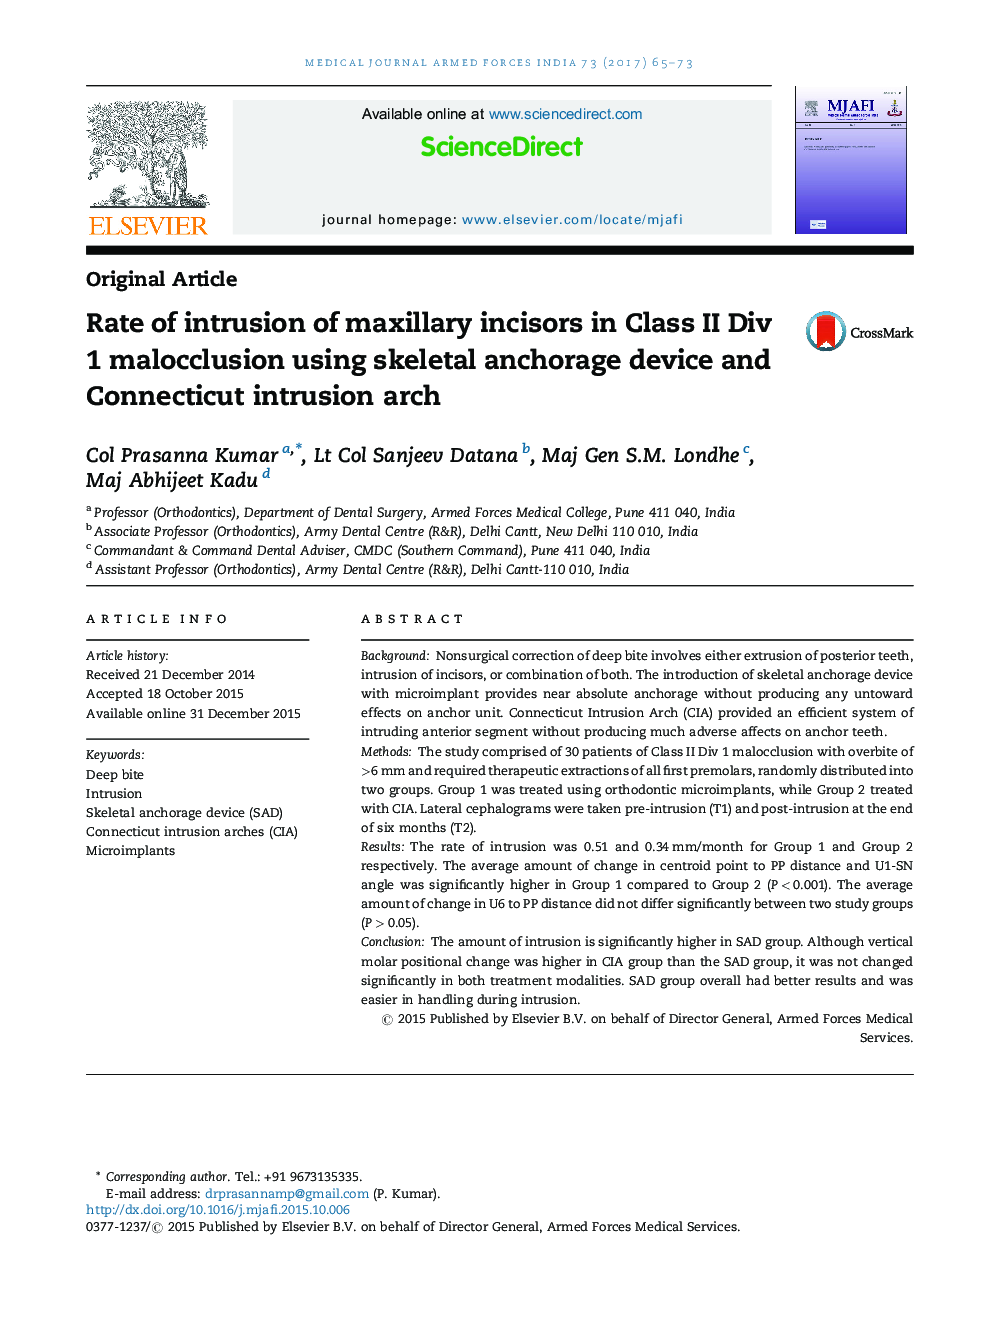 Rate of intrusion of maxillary incisors in Class II Div 1 malocclusion using skeletal anchorage device and Connecticut intrusion arch